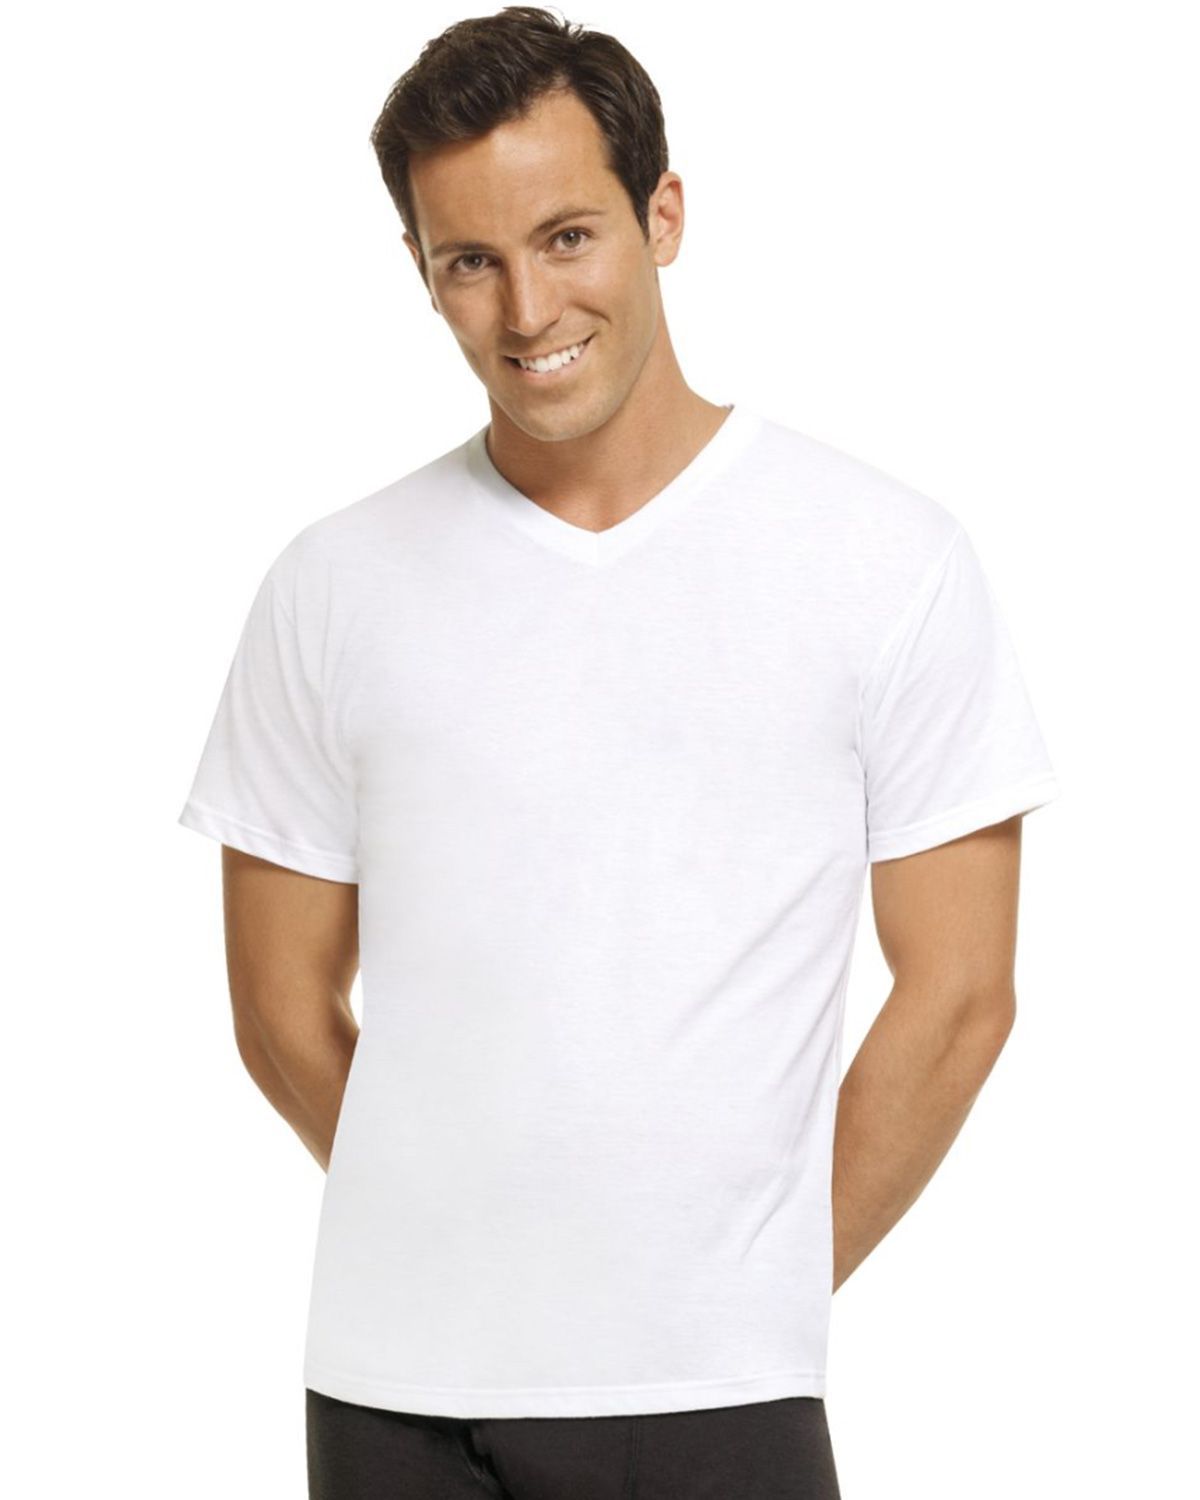 Size Chart for Hanes 7577h3 Comfortblend Mens Perfect T White V-Neck ...